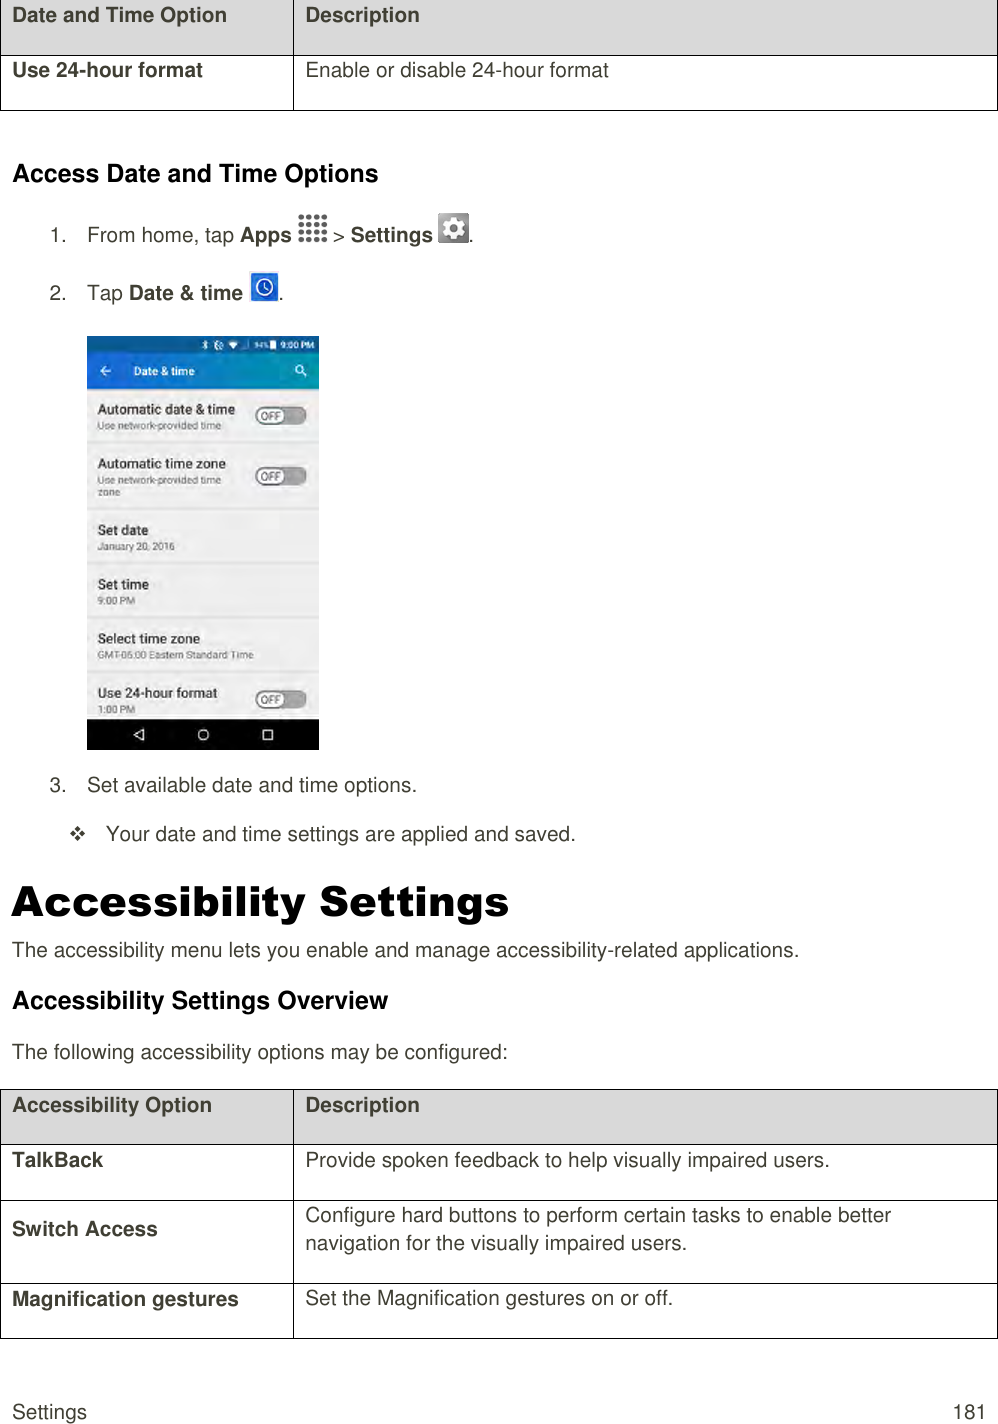 Settings  181 Date and Time Option Description Use 24-hour format Enable or disable 24-hour format  Access Date and Time Options 1.  From home, tap Apps   &gt; Settings  .  2.  Tap Date &amp; time  .   3.  Set available date and time options.   Your date and time settings are applied and saved. Accessibility Settings The accessibility menu lets you enable and manage accessibility-related applications. Accessibility Settings Overview The following accessibility options may be configured:  Accessibility Option Description TalkBack Provide spoken feedback to help visually impaired users. Switch Access Configure hard buttons to perform certain tasks to enable better navigation for the visually impaired users. Magnification gestures Set the Magnification gestures on or off. 